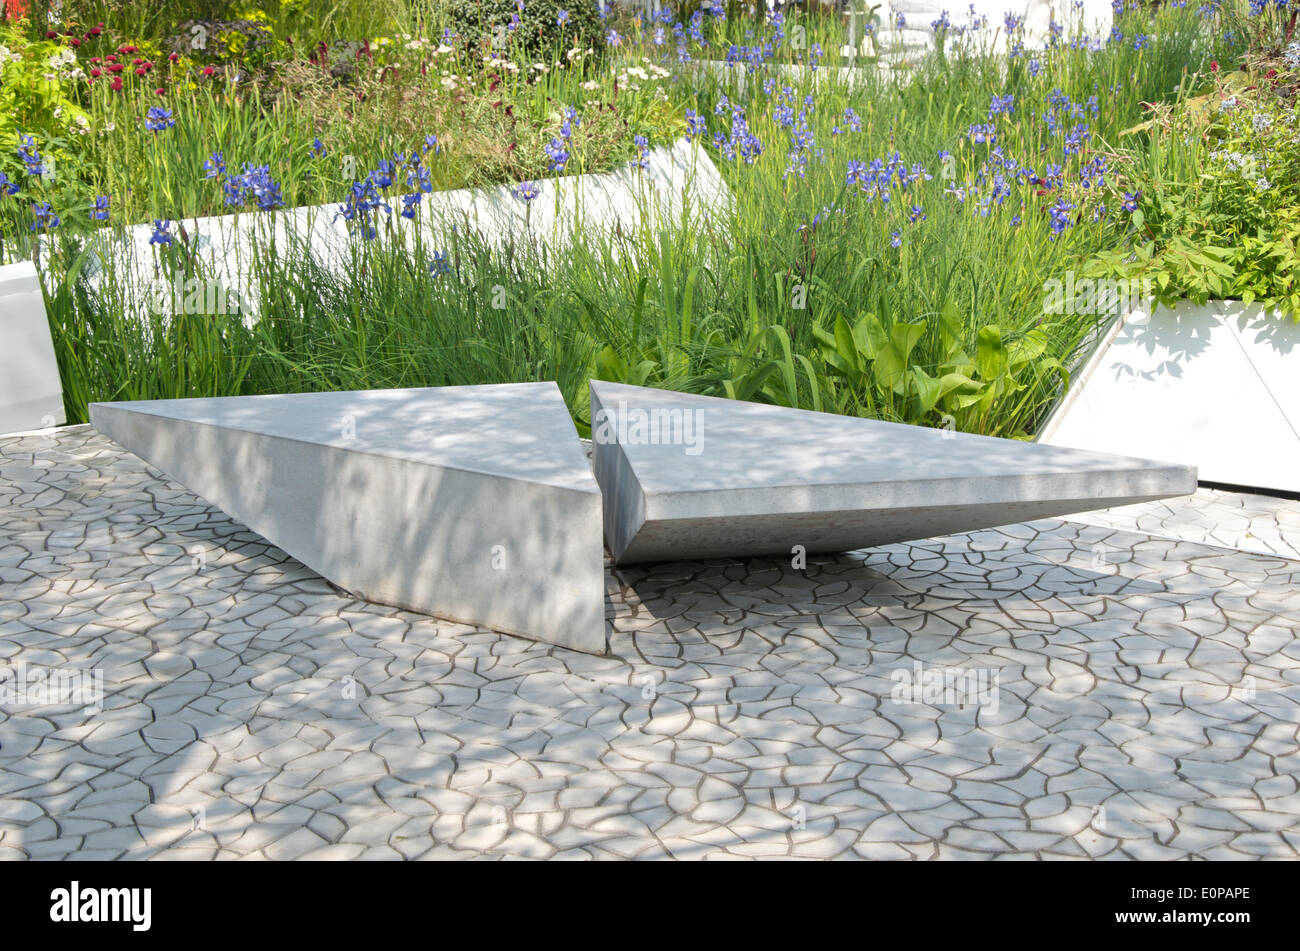 View of Iris and seating area in the The RBC Waterscape Garden at RHS Chelsea Flower Show. The garden designed by Hugo Bugg and sponsored by the Royal Bank of Canada, shows how water can be used in a sustainable way. The garden was awarded a gold medal. Stock Photo